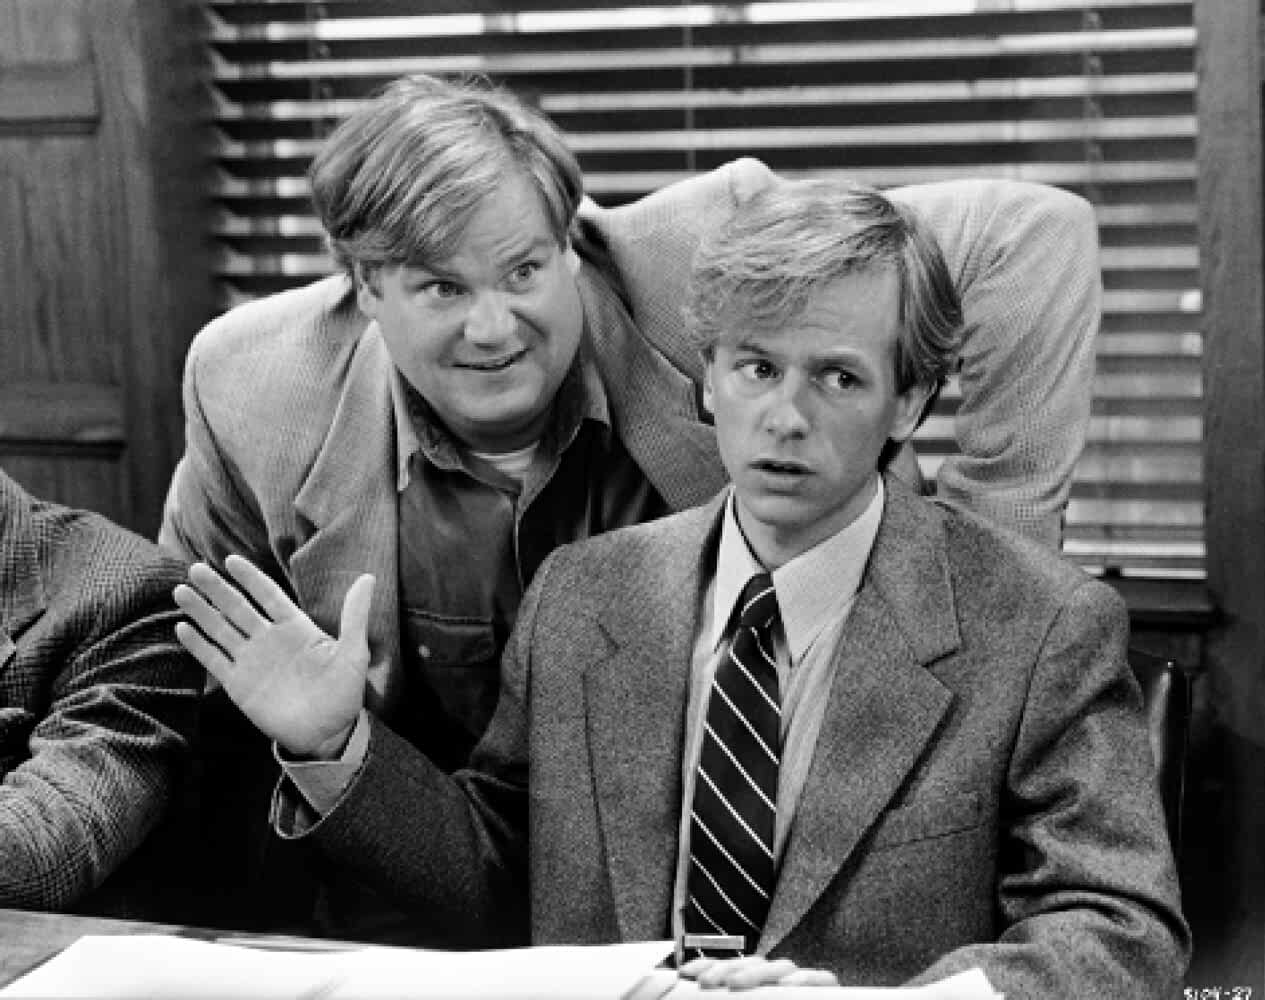 Chris Farley and David Spade in Tommy Boy (1995)